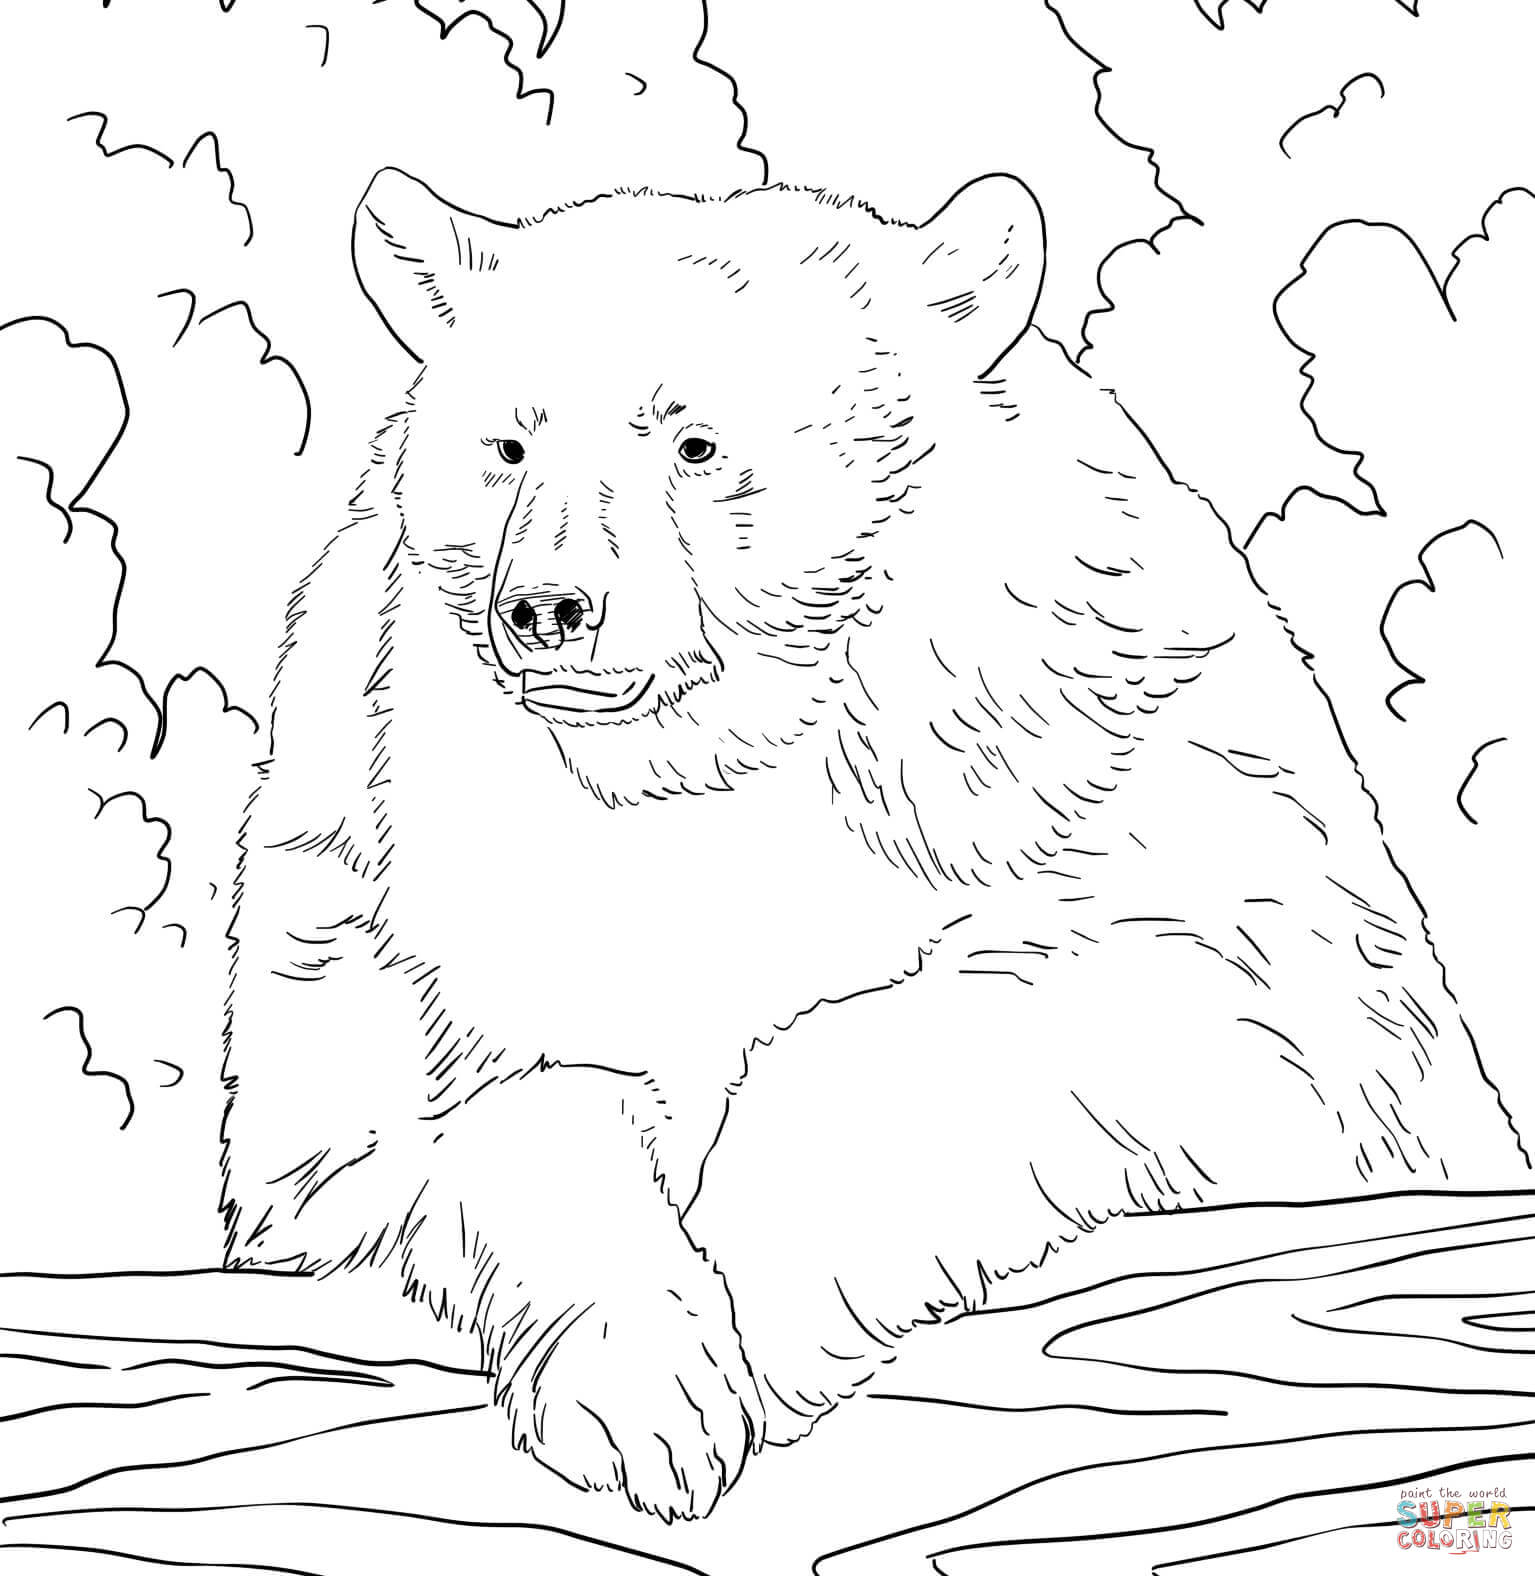 Coloring Pages Of Black Bears American Black Bear Portrait Coloring Page Free Printable Coloring